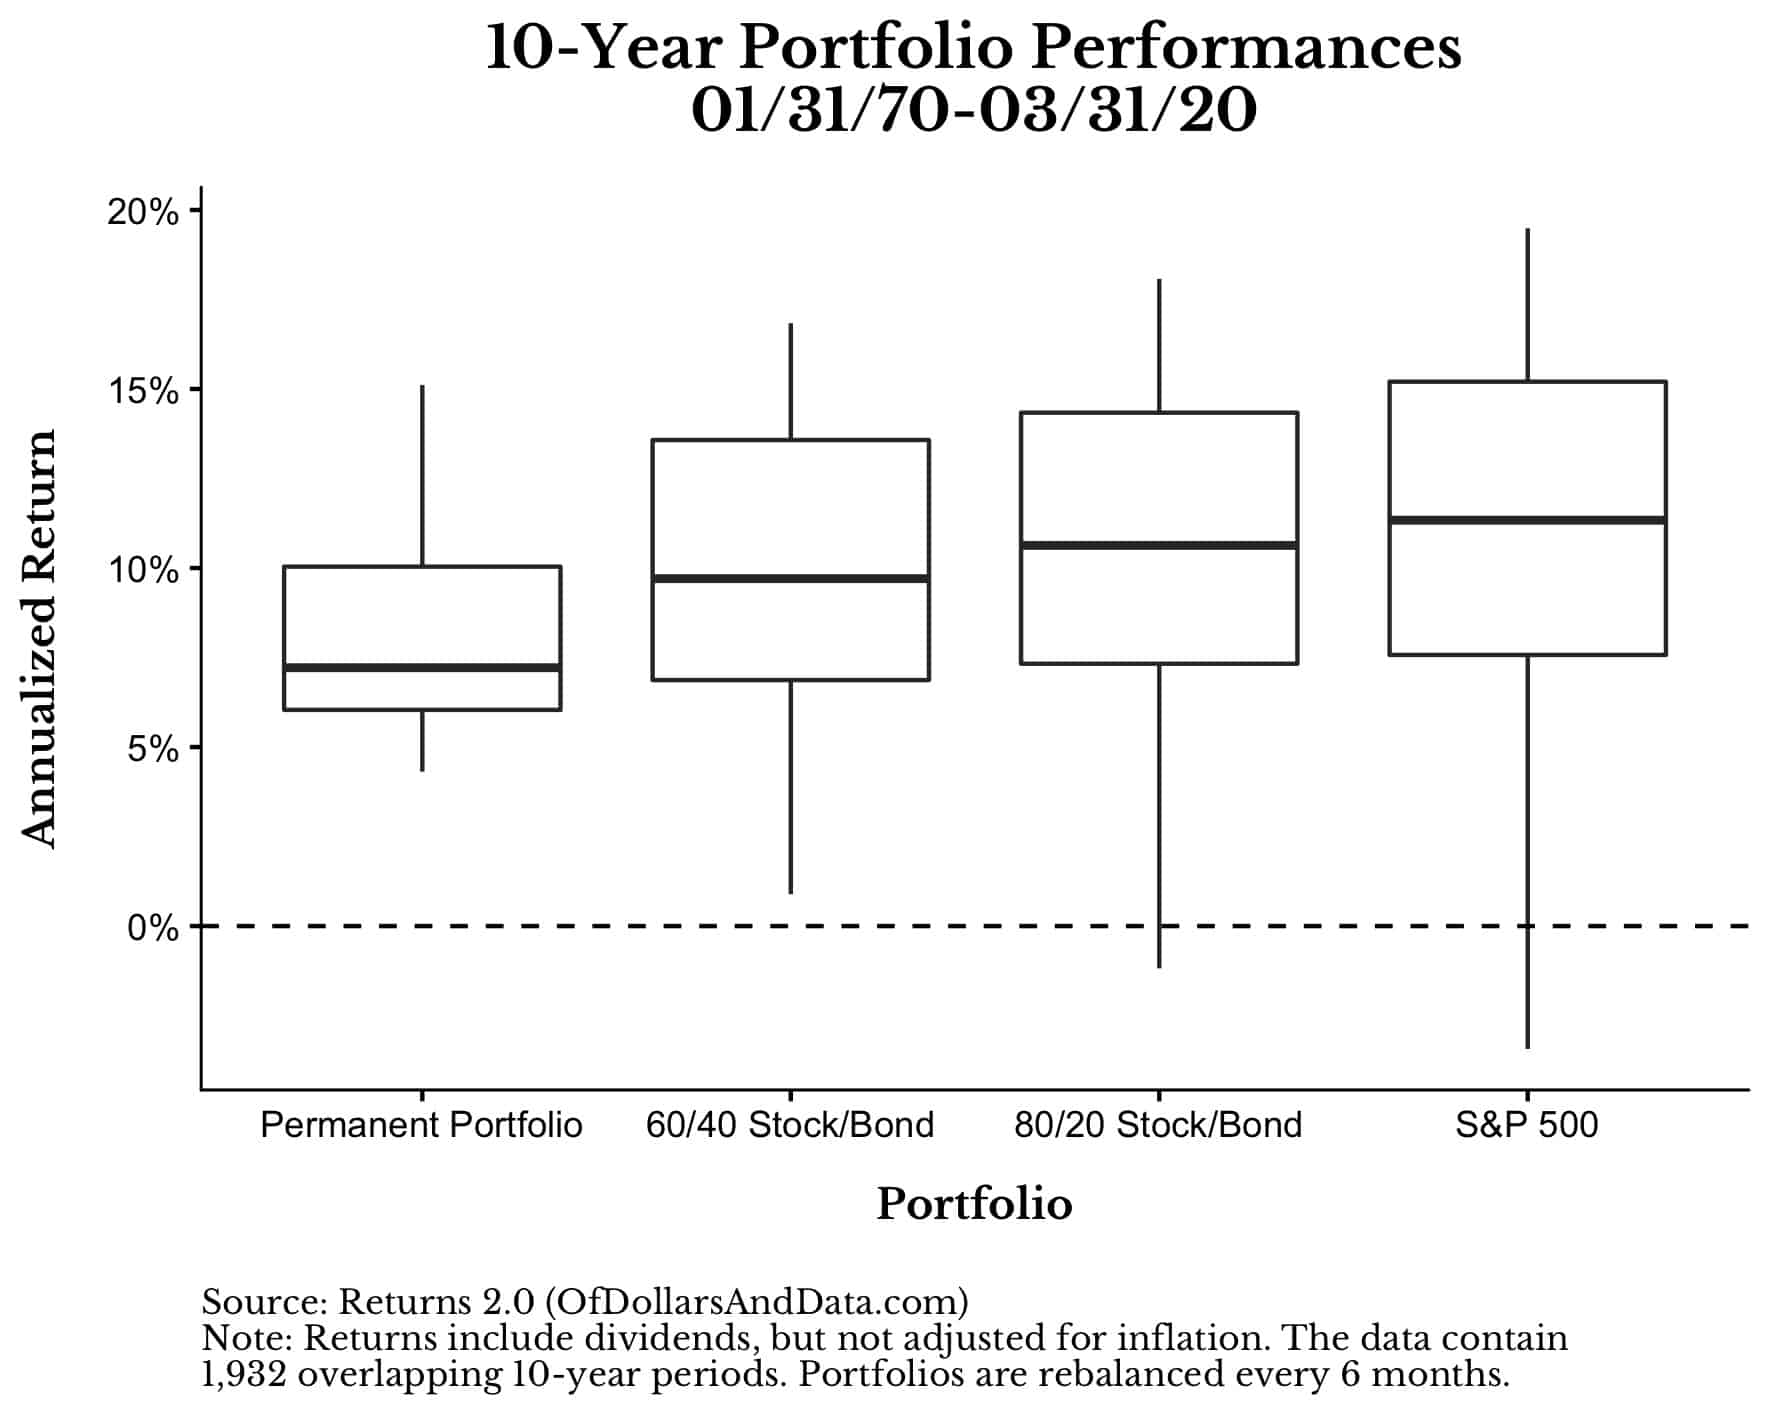 10-Year boxplot of performance for the Permanent Portfolio, 60/40, 80/20, and the S&P 500 from 1970 to 2020